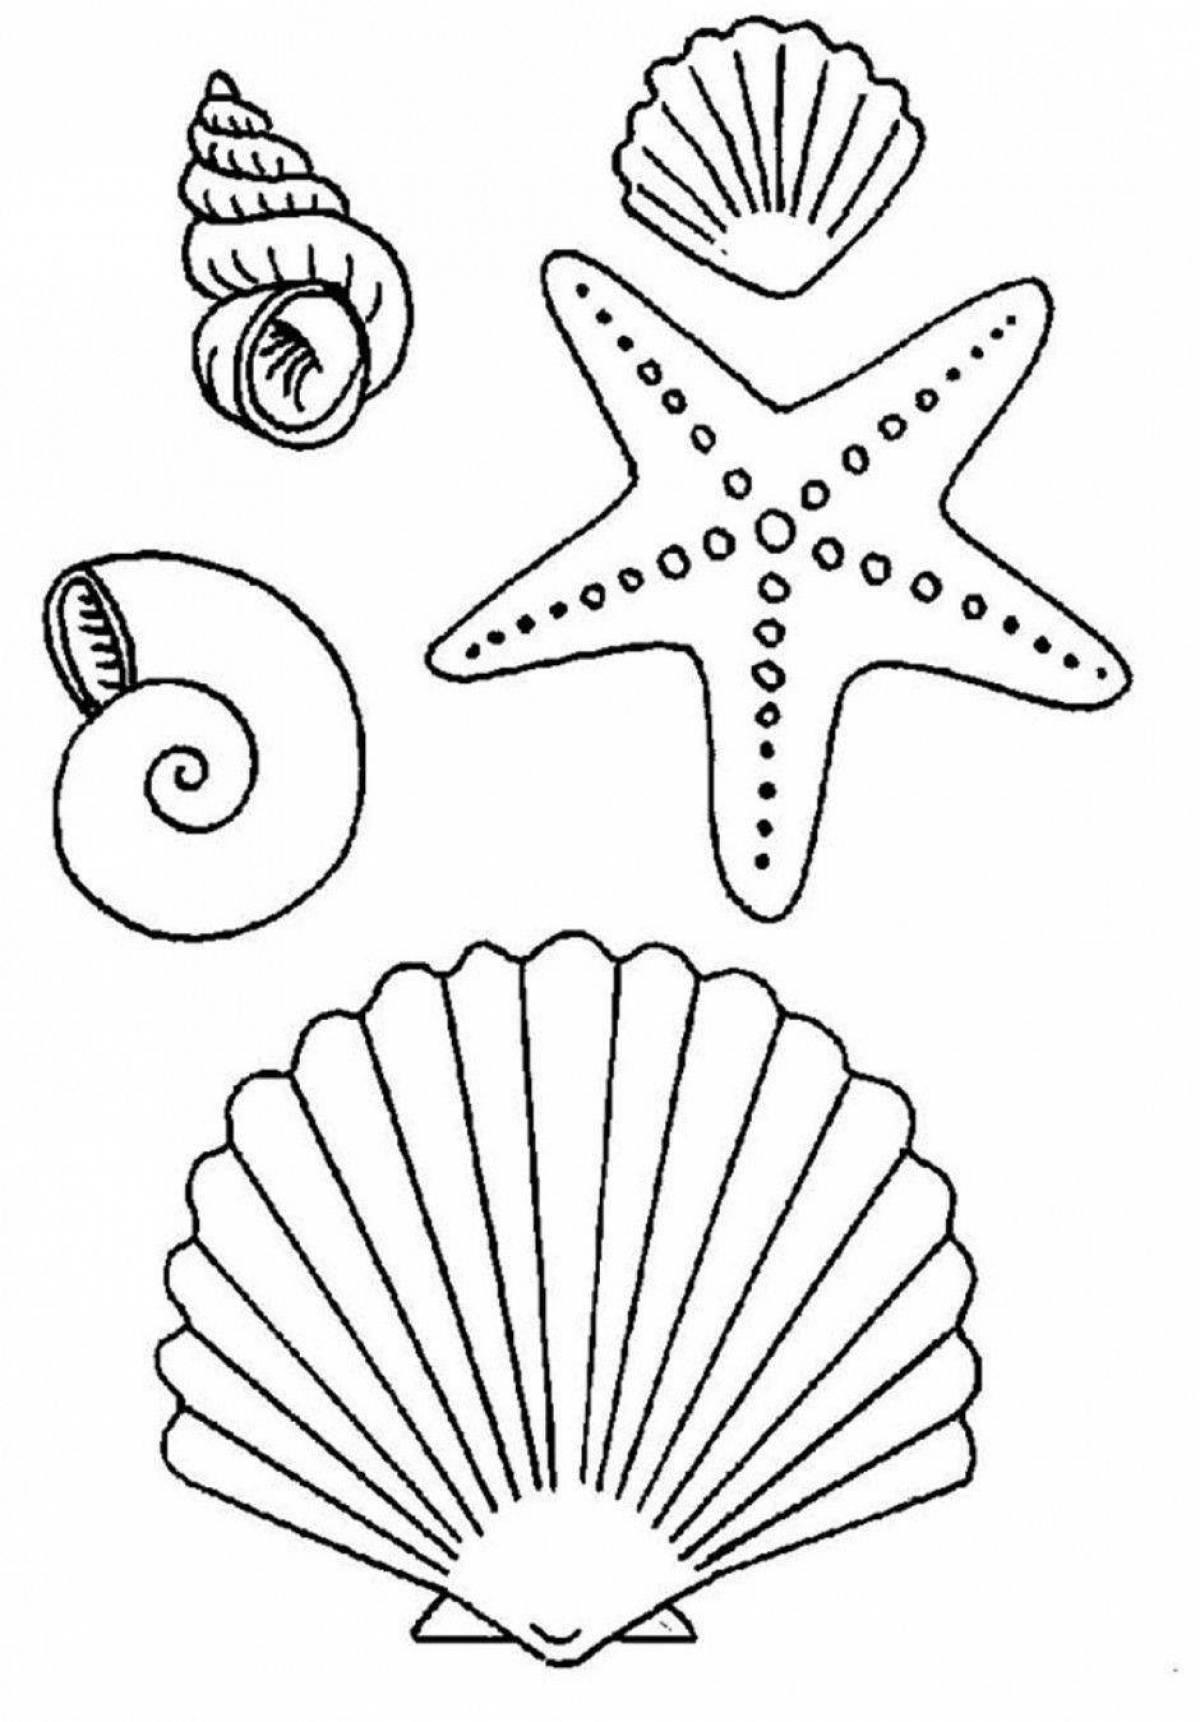 Fabulous shell coloring for kids